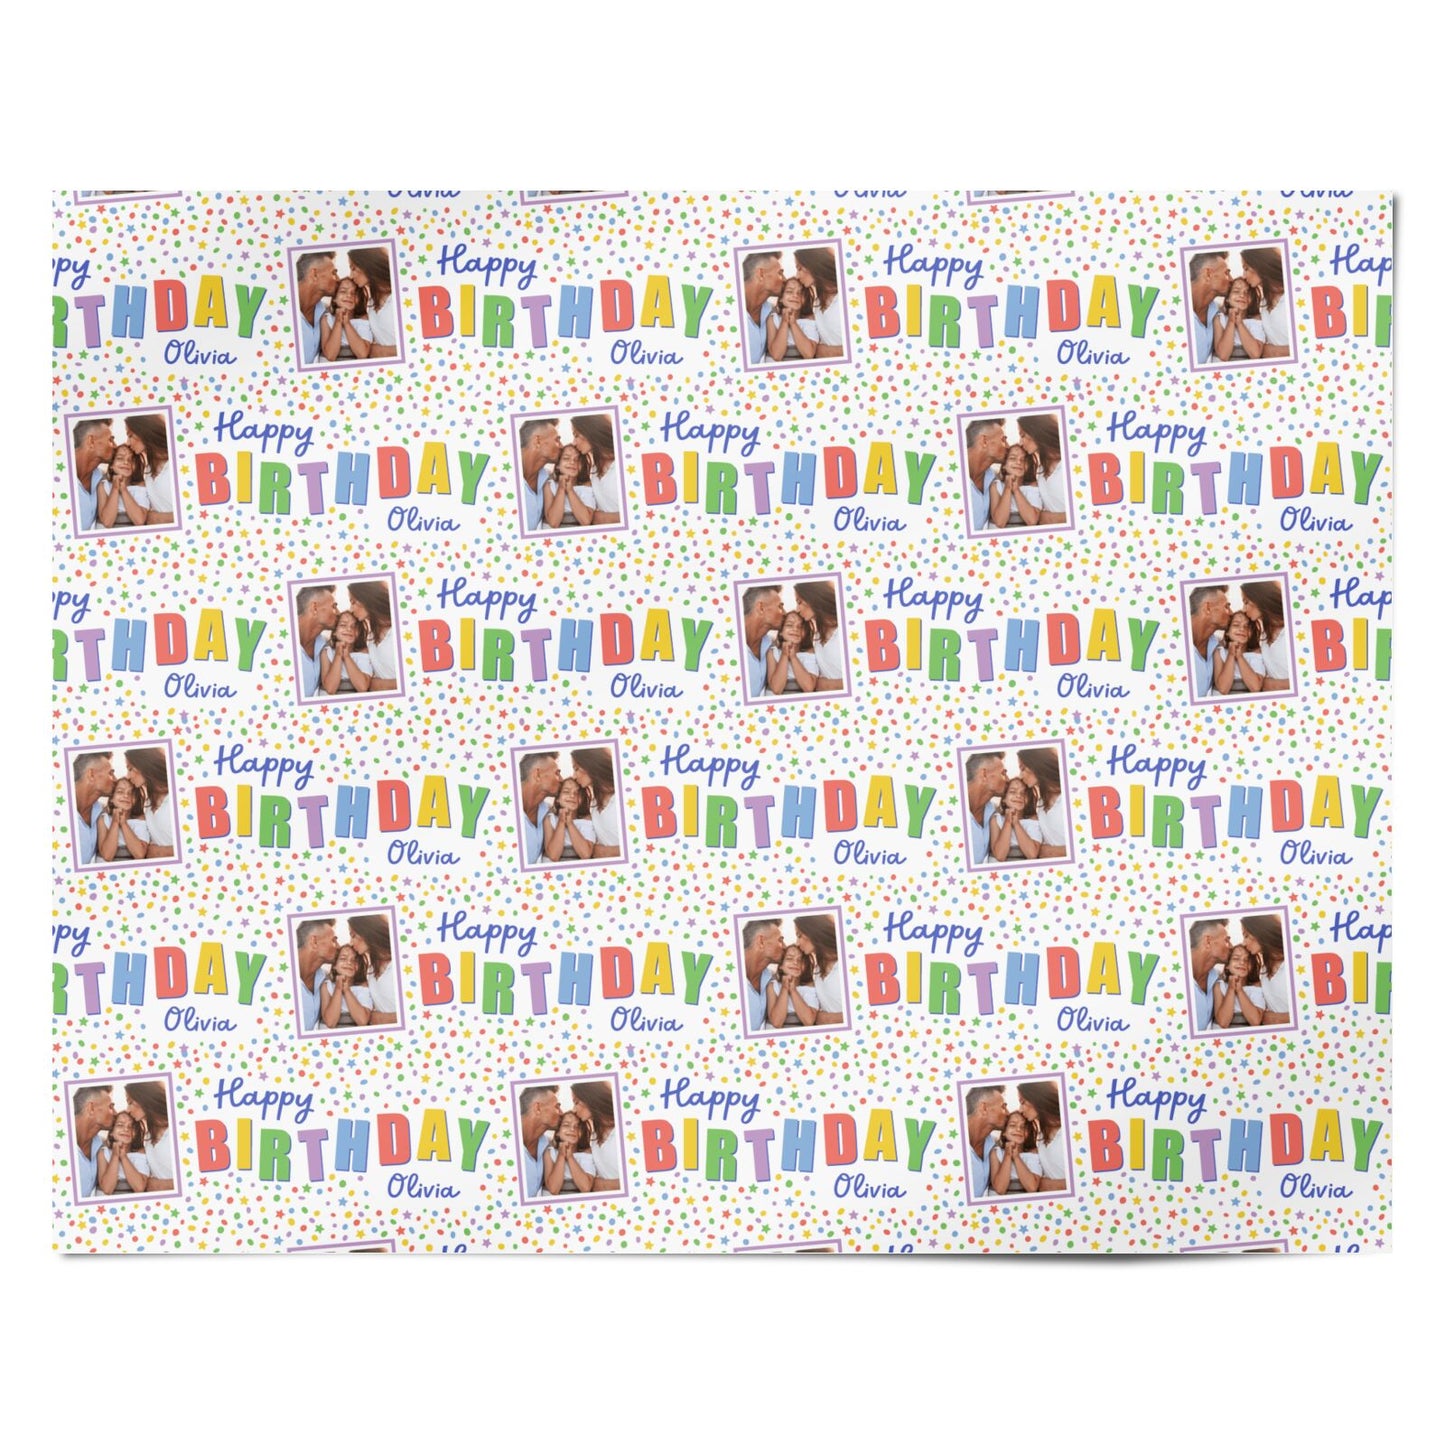 Happy Birthday Personalised Photo Upload Personalised Wrapping Paper Alternative